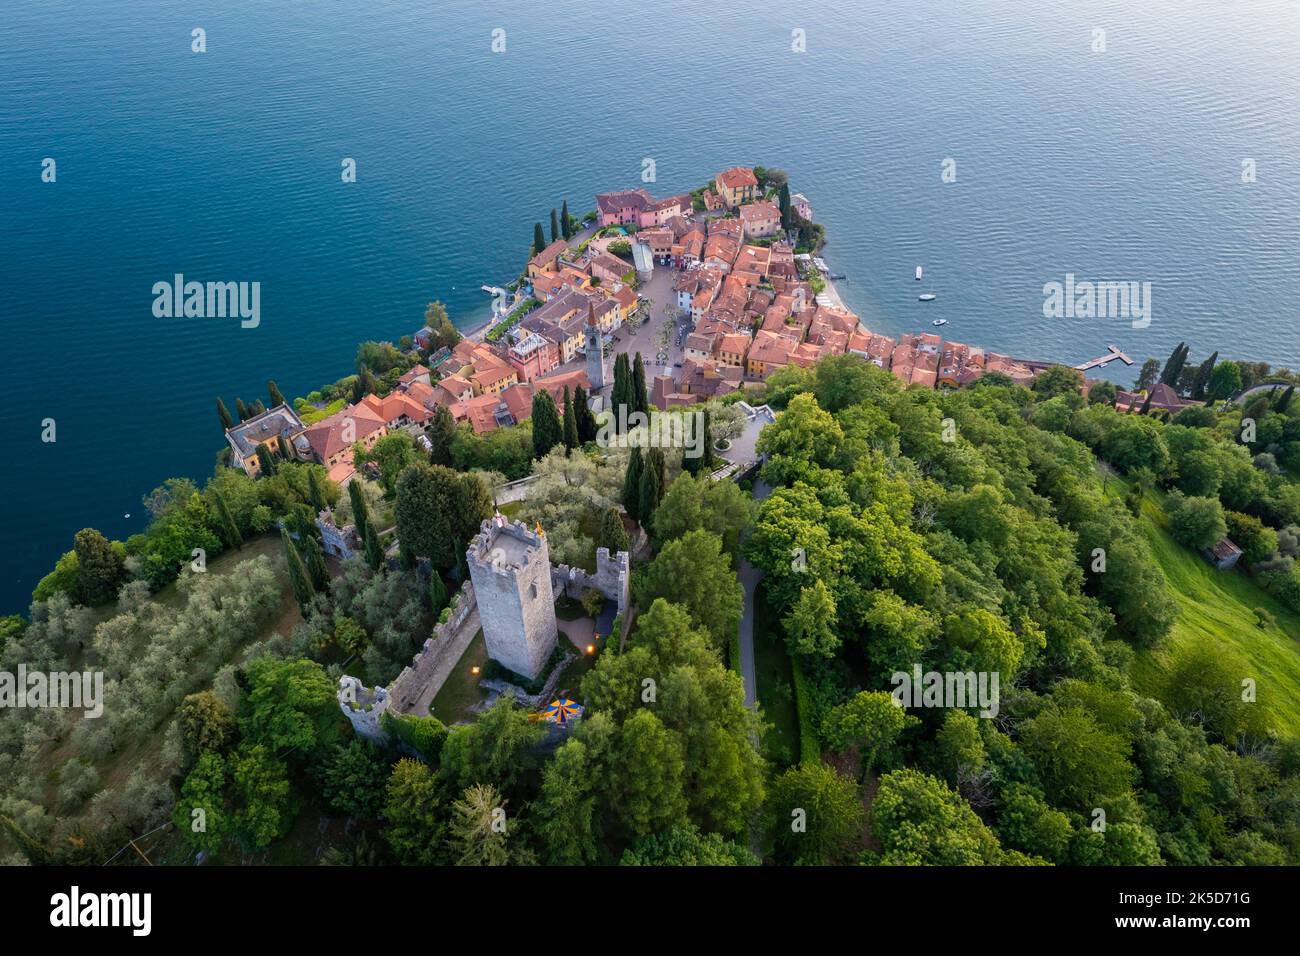 Aerial view of the castle of Vezio, dominating lake Como and Varenna town at sunset. Vezio, Perledo, Lecco district, Lombardy, Italy, Europe. Stock Photo